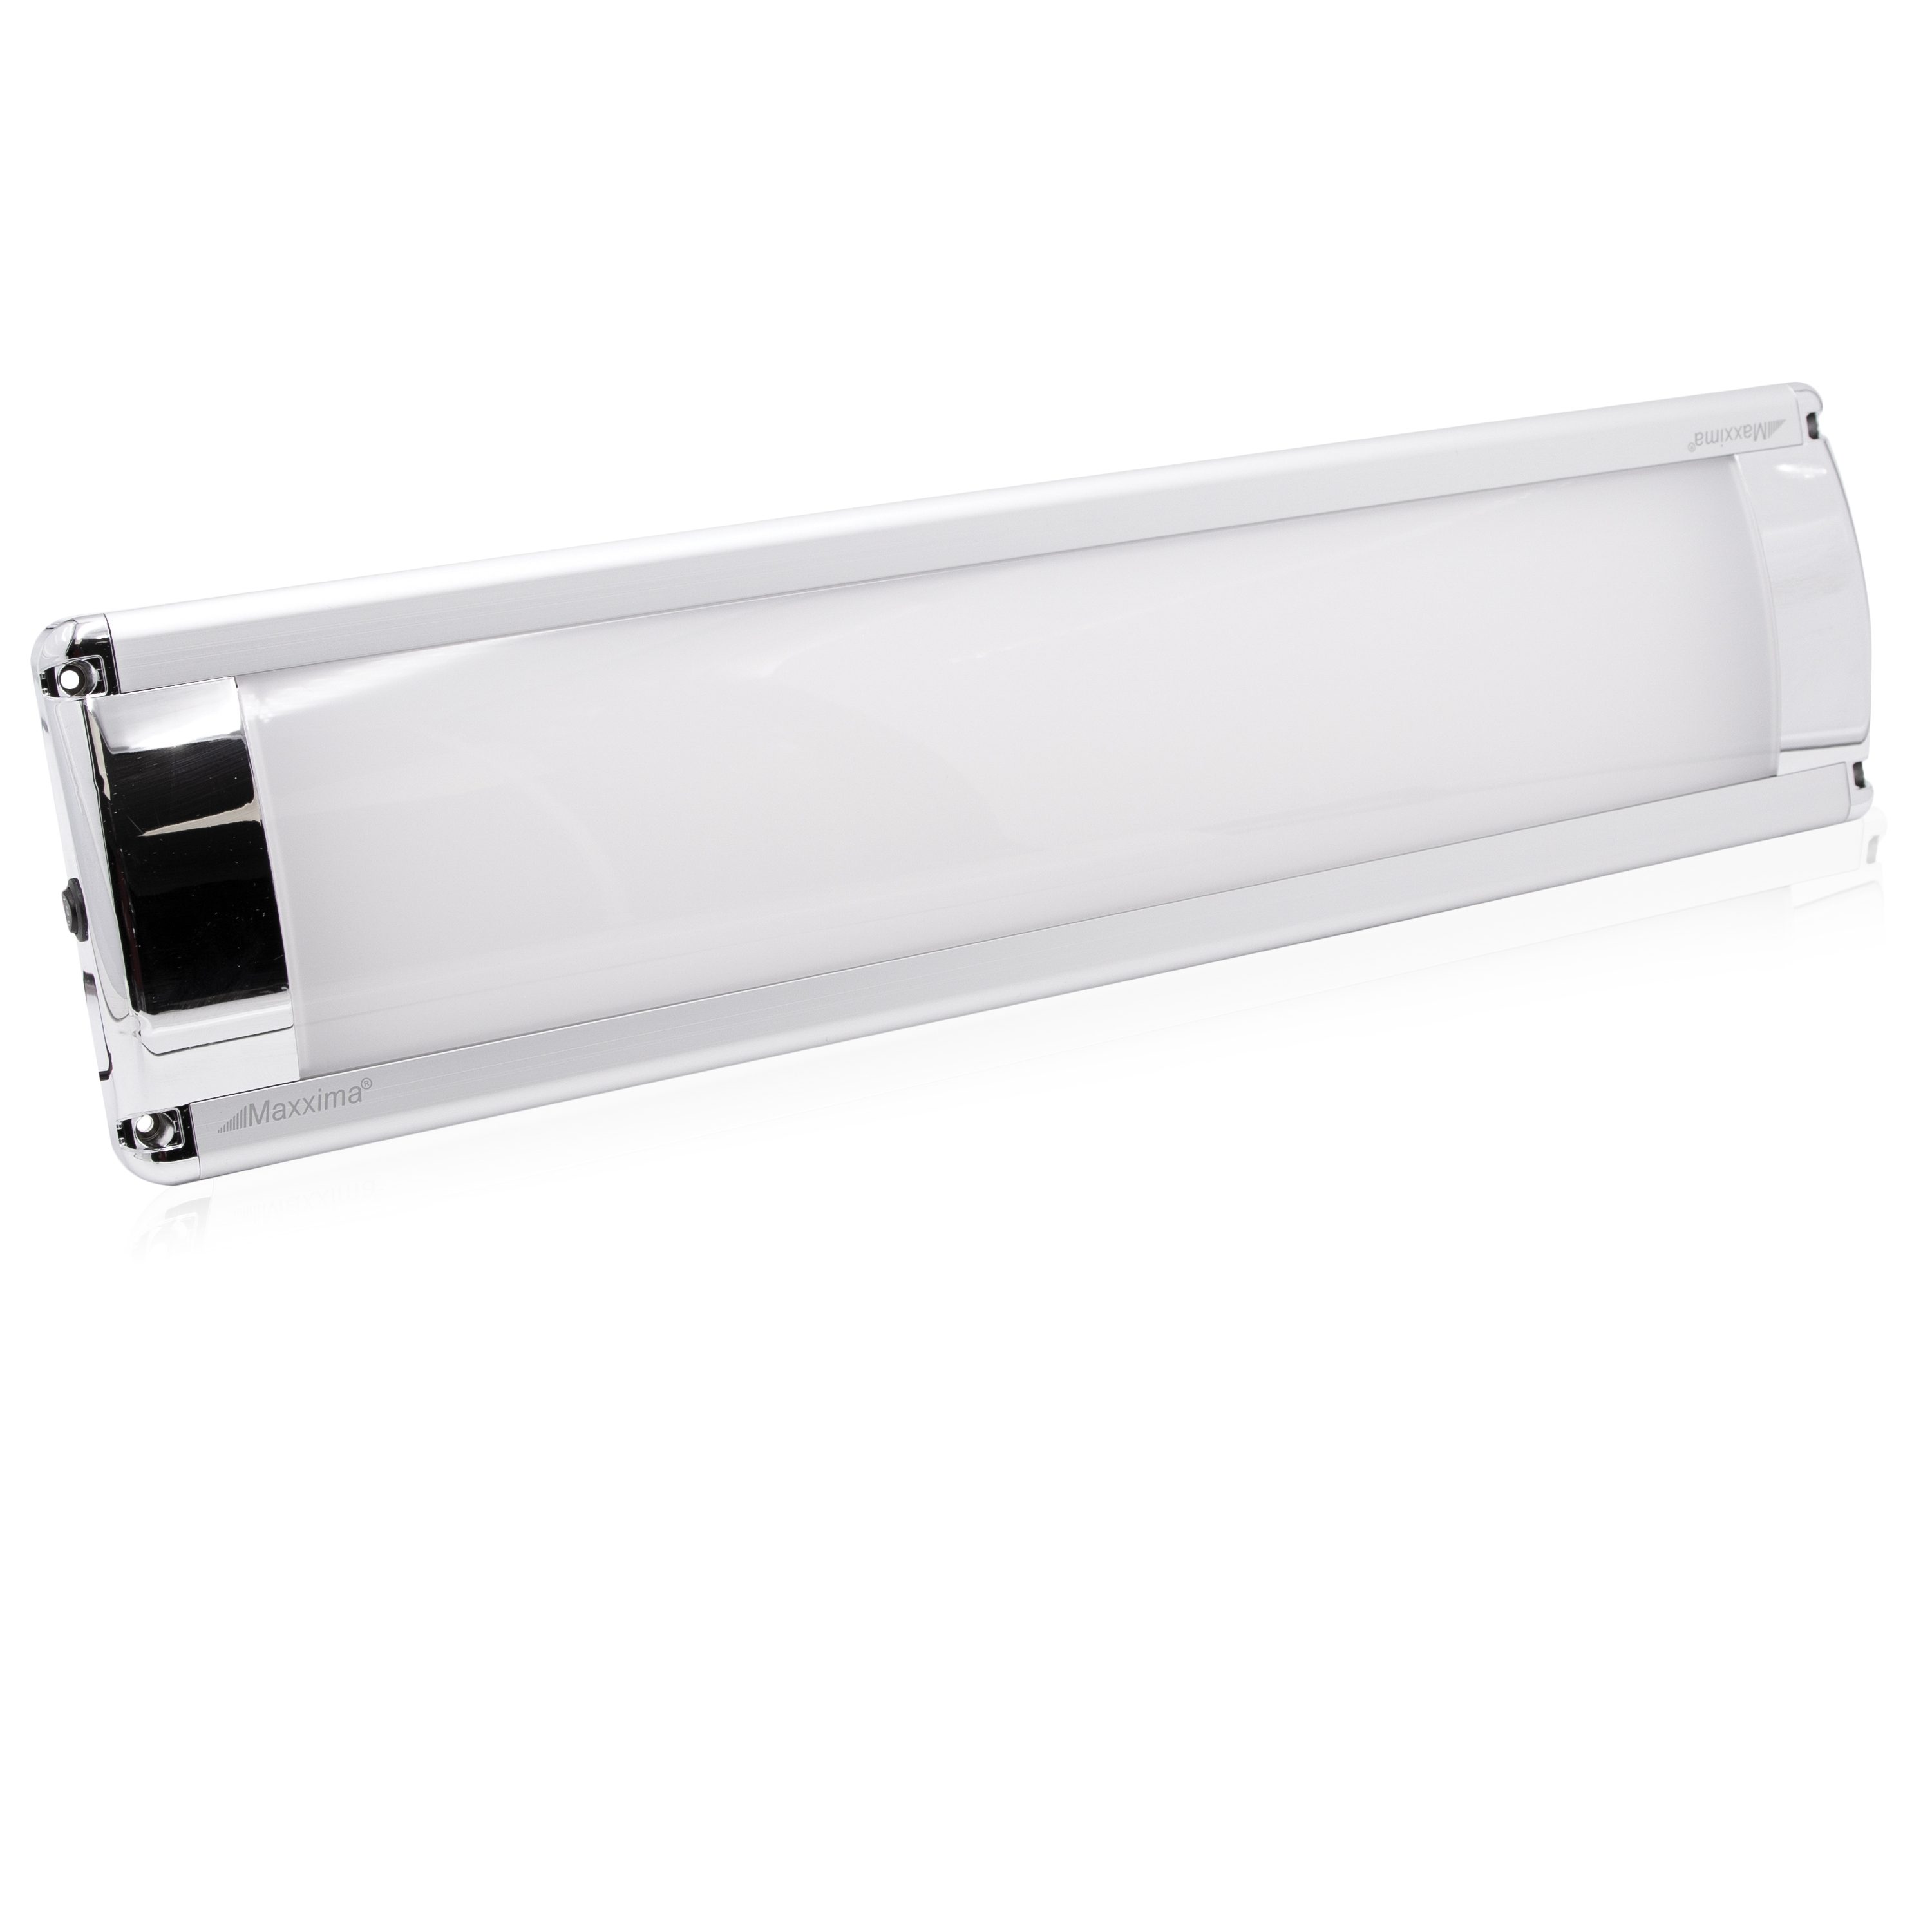 23" Surface Mount 3,000 Lumen LED Interior Light, Chrome Housing with Switch